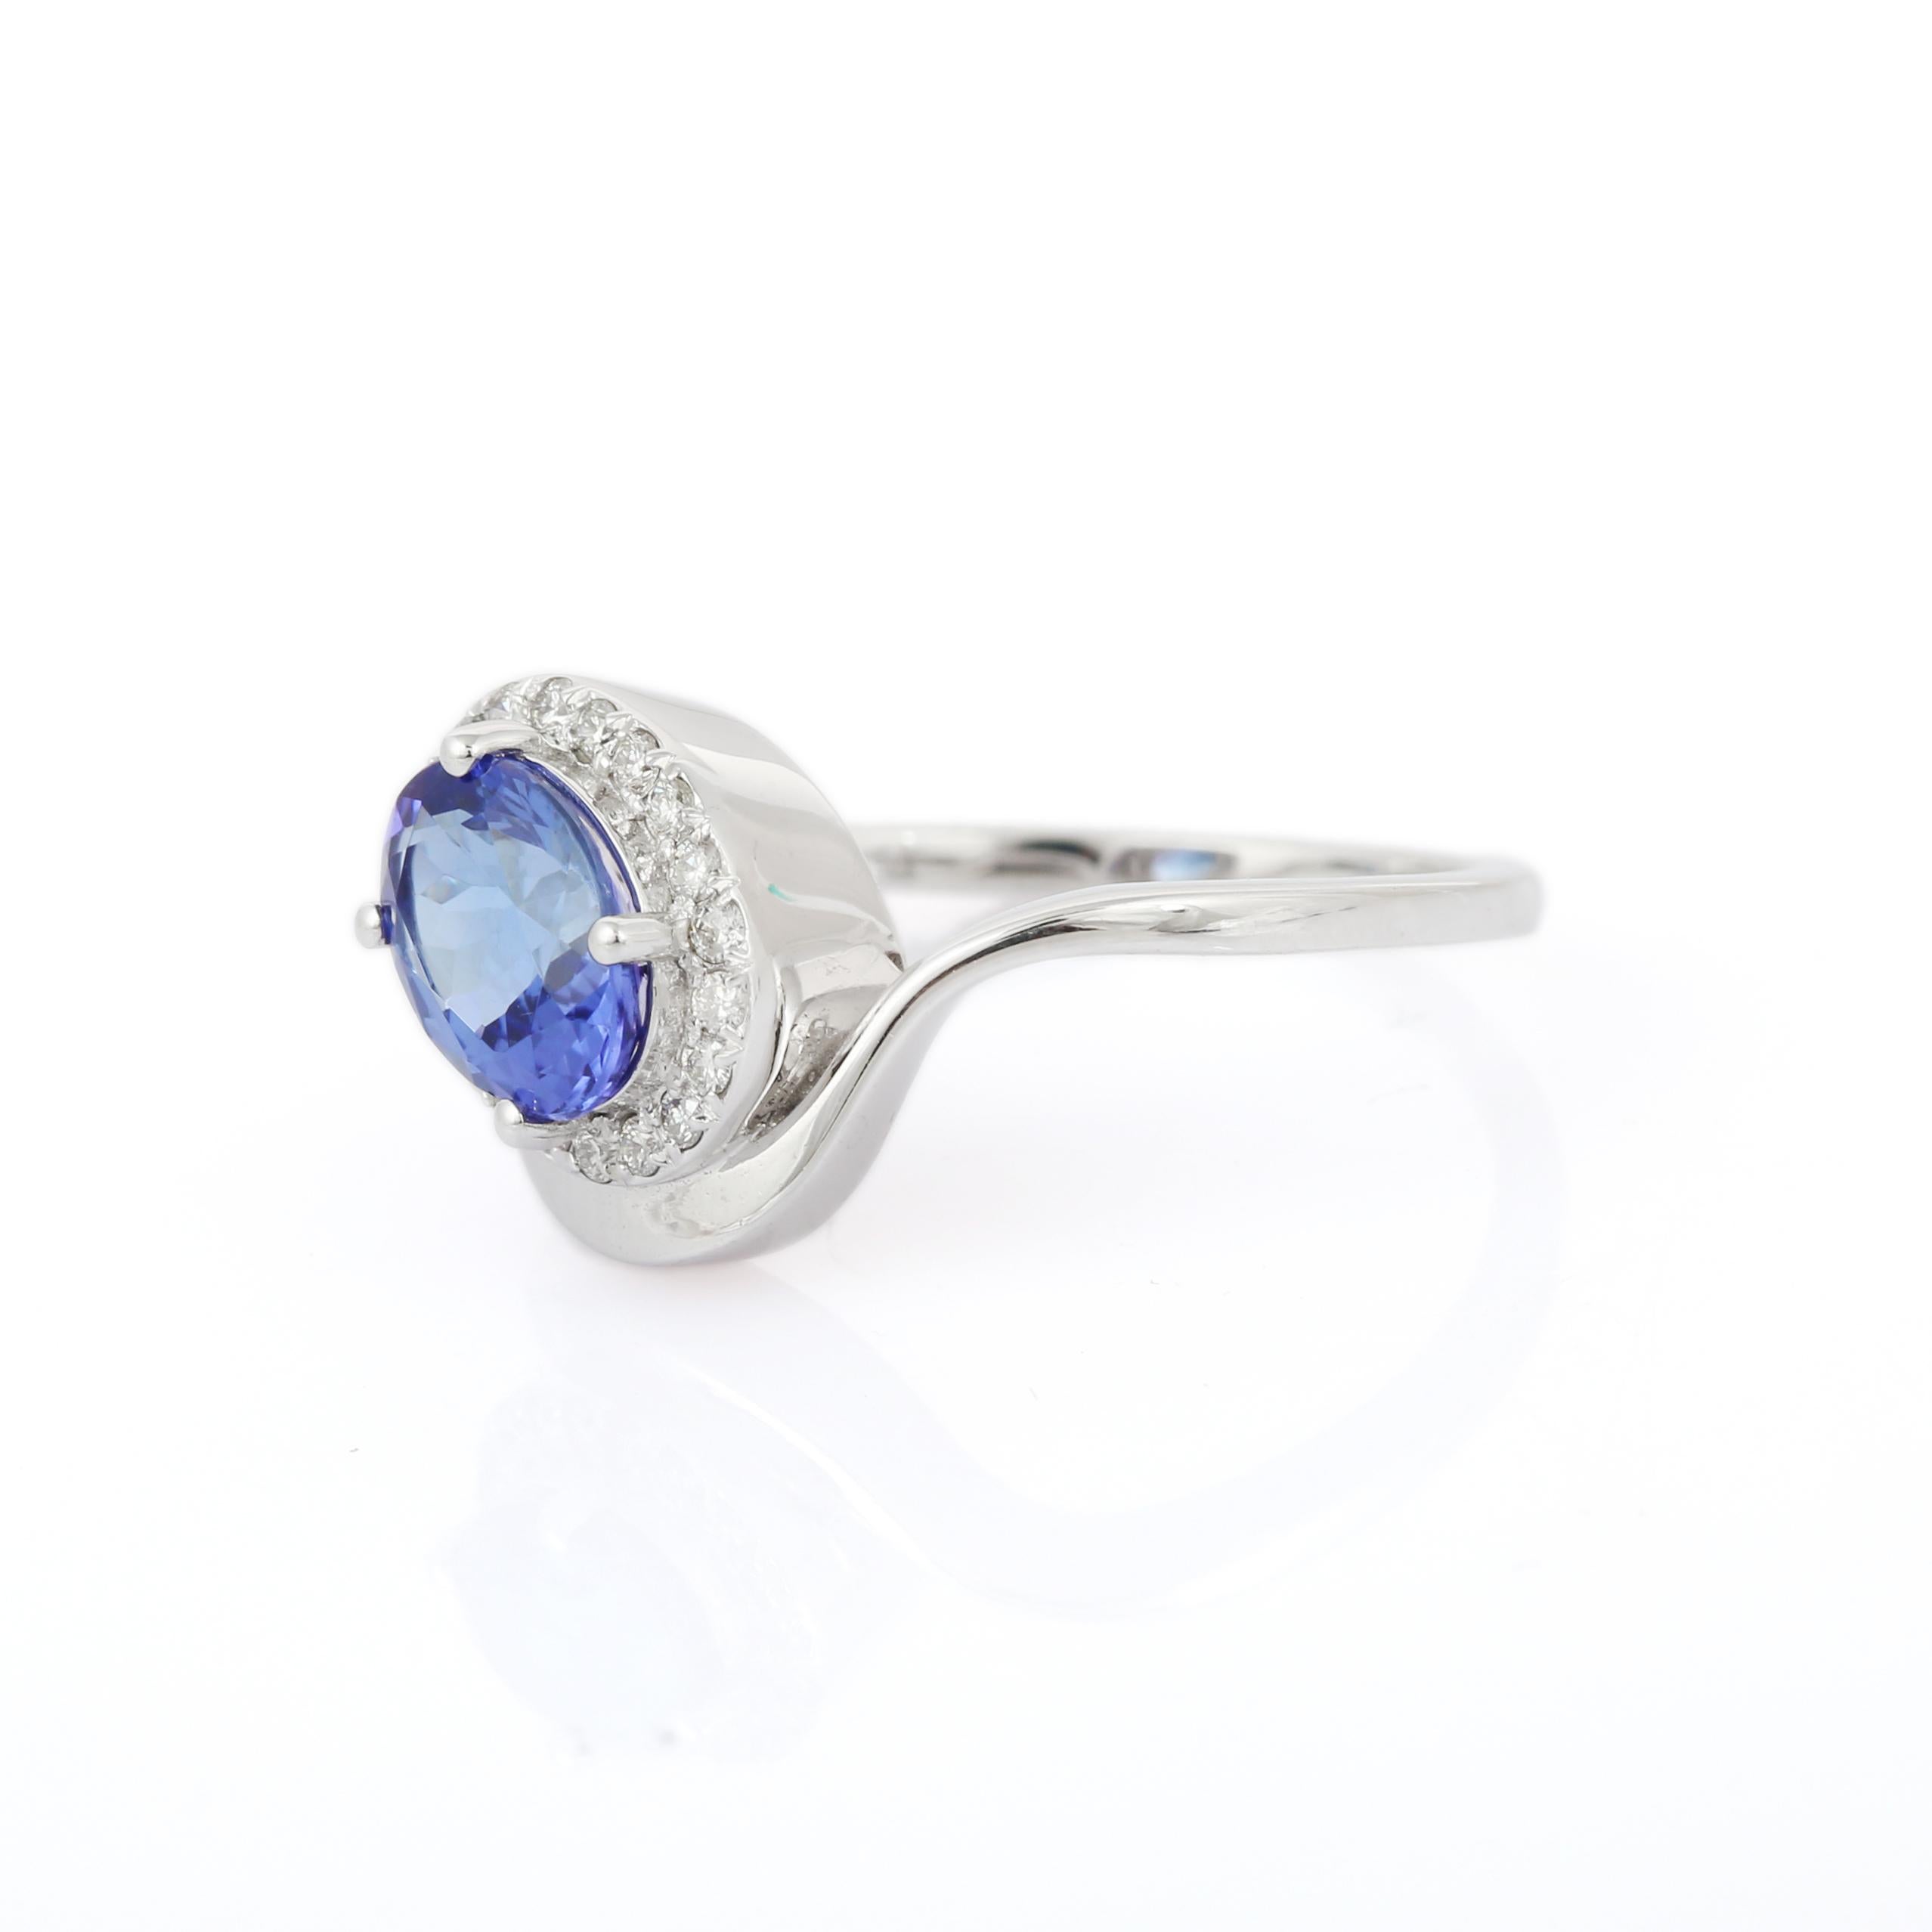 For Sale:  Natural Tanzanite and Diamond Ring in 18k Solid White Gold   2